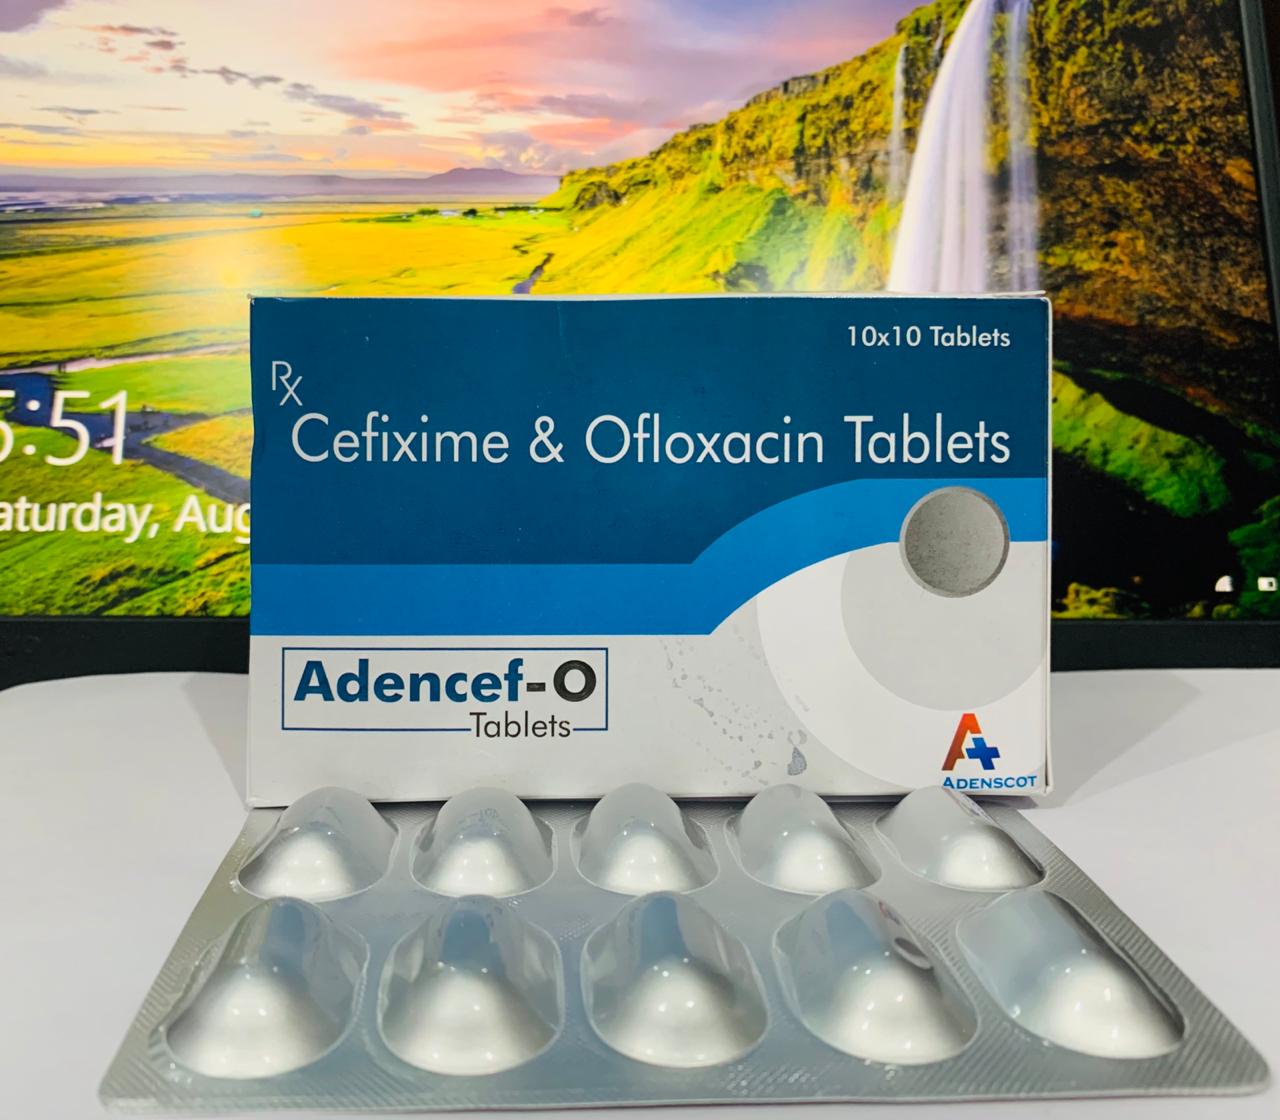 Product Name: Adencef O, Compositions of Adencef O are Cefixime &  Ofloxacin Tablets - Adenscot Healthcare Pvt. Ltd.